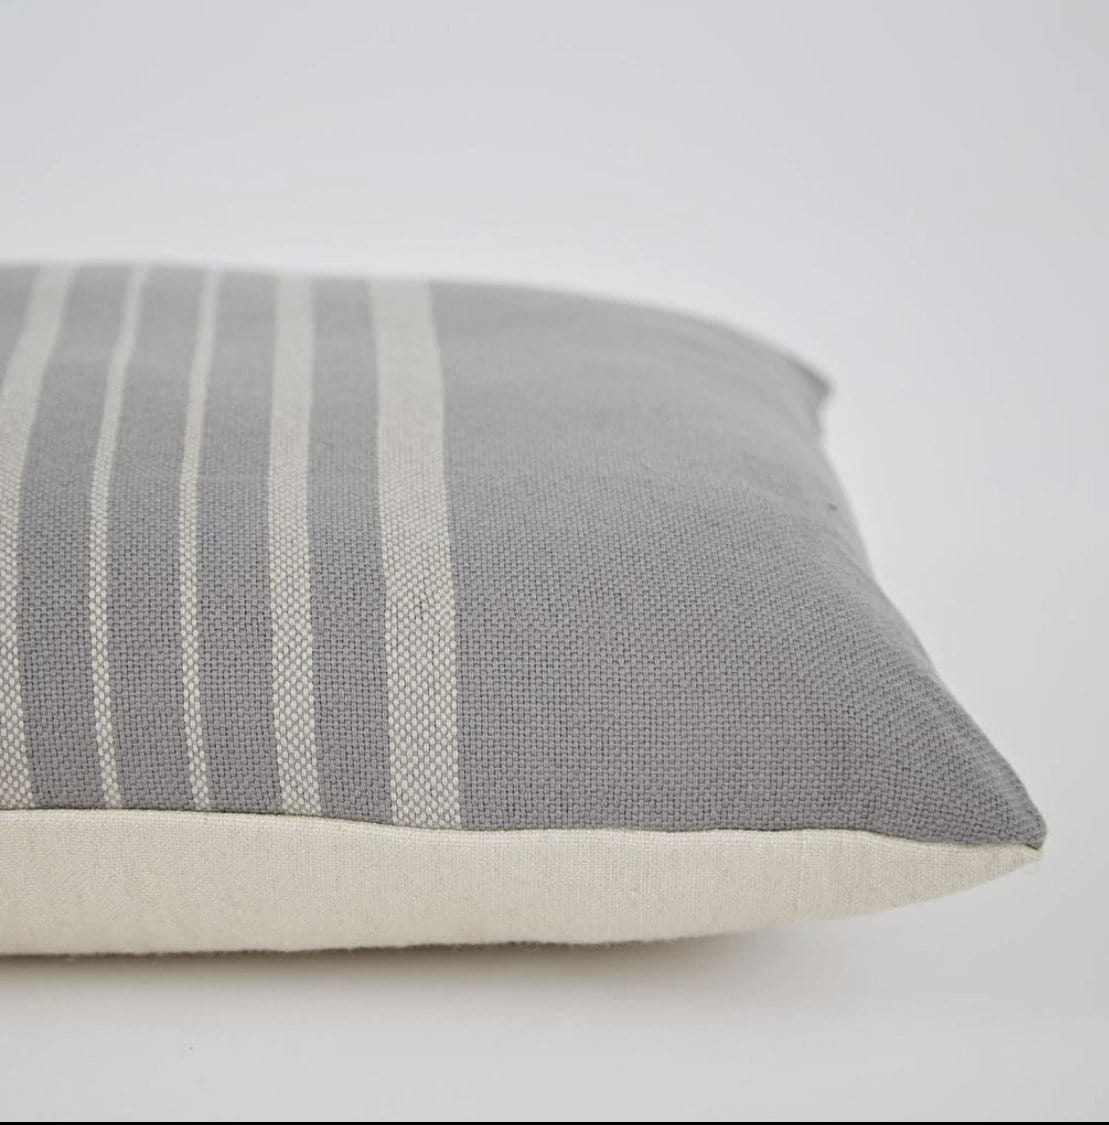 Recycled Antibes Grey with Linen Stripe Cushion